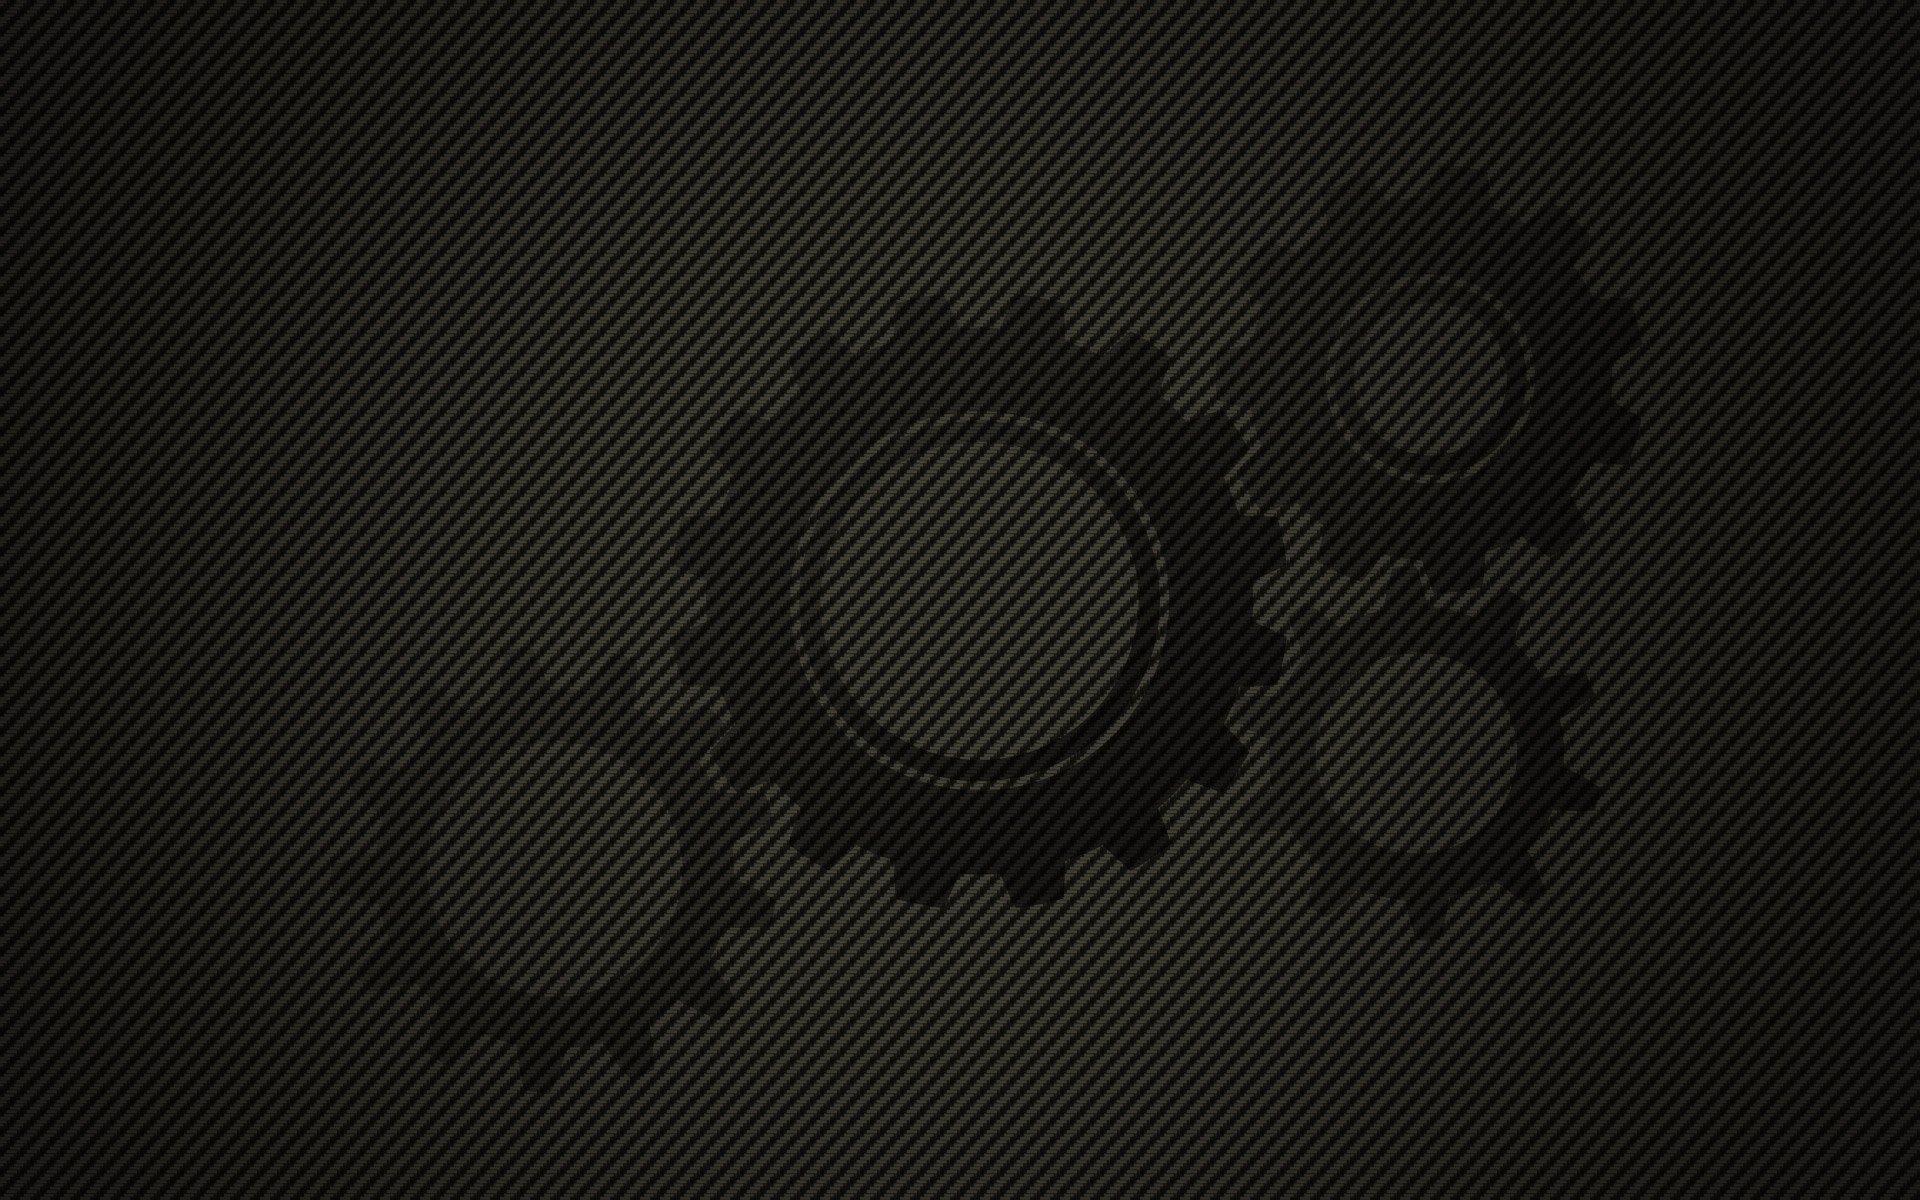 Amazing Gear Wallpaper Background in HD for Download